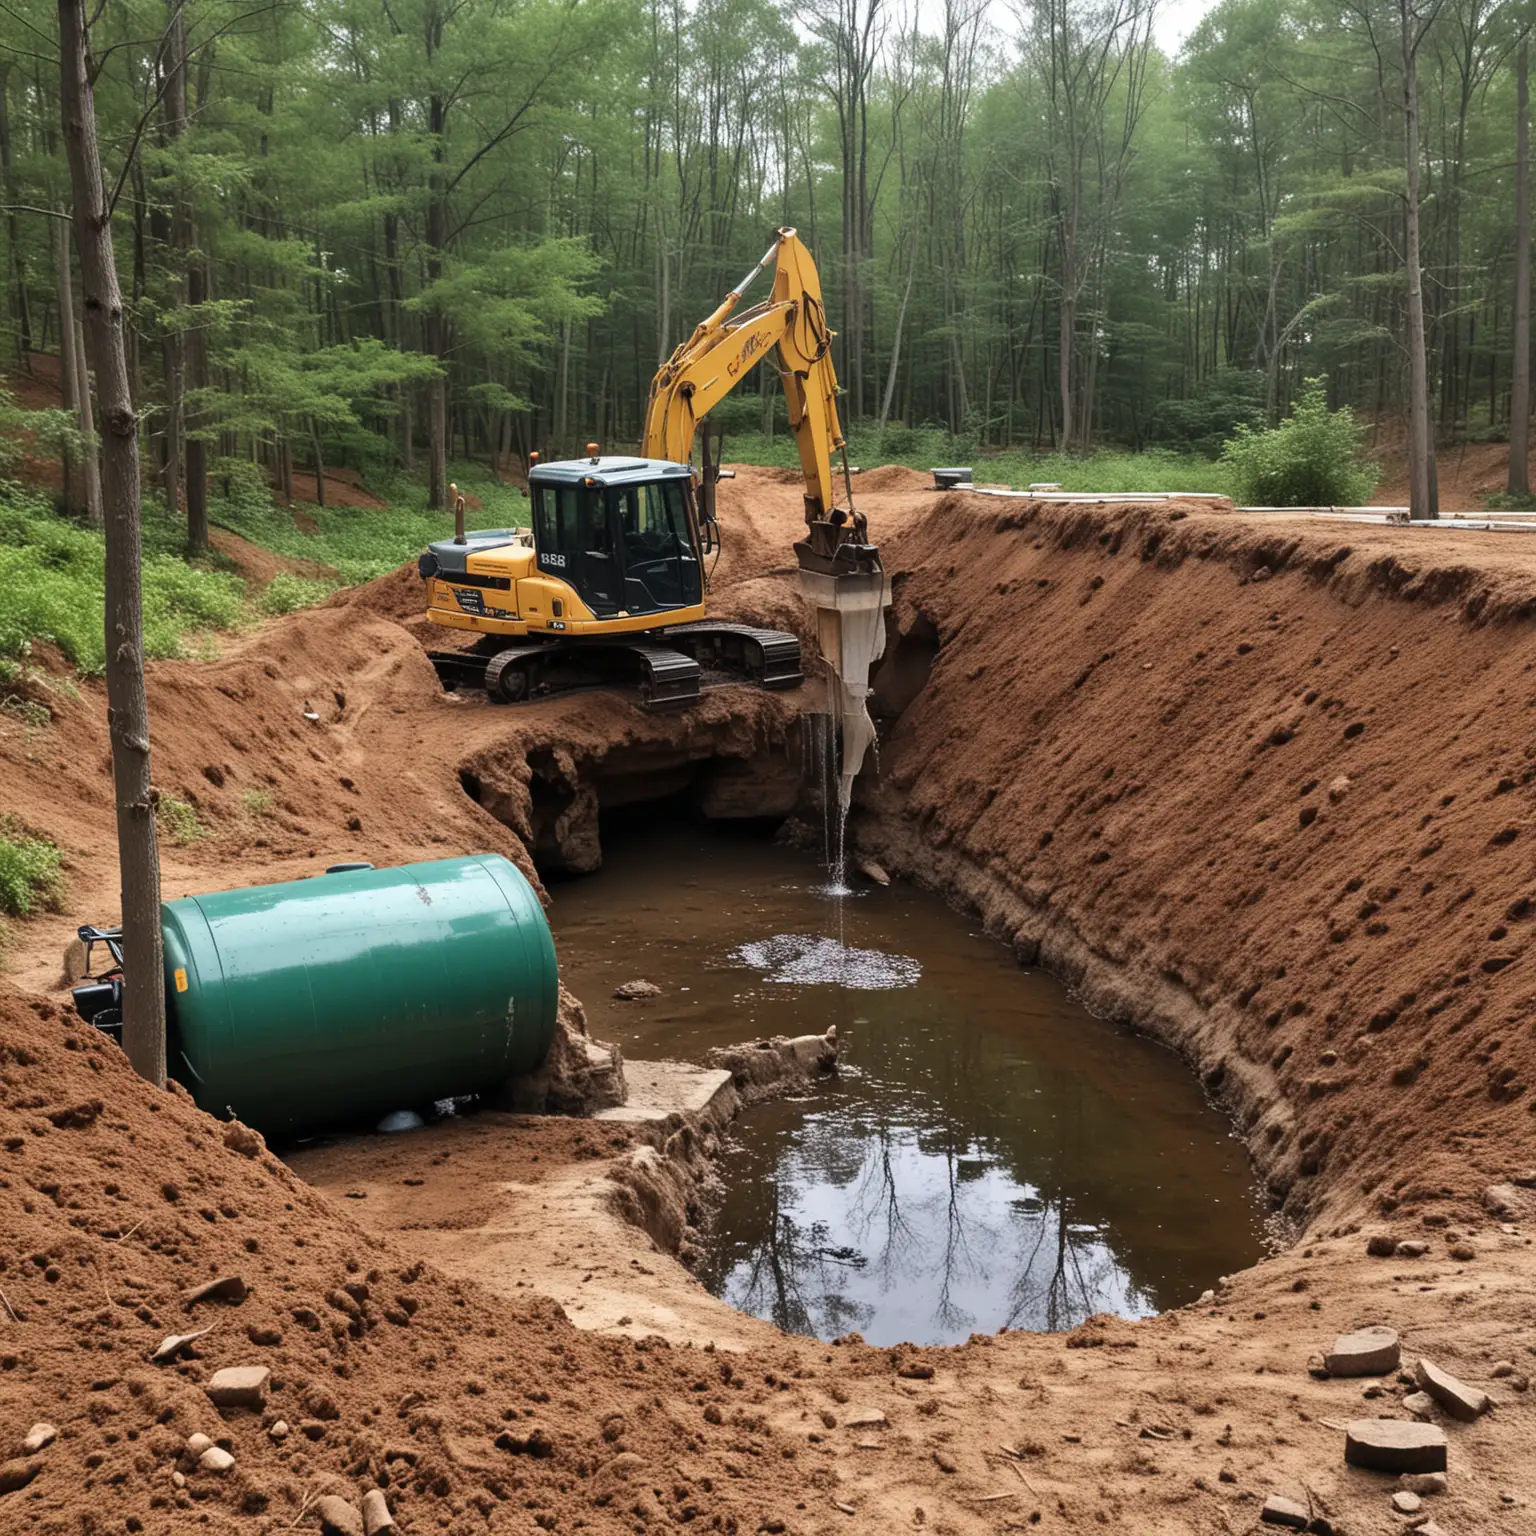 SEptic Tank services
